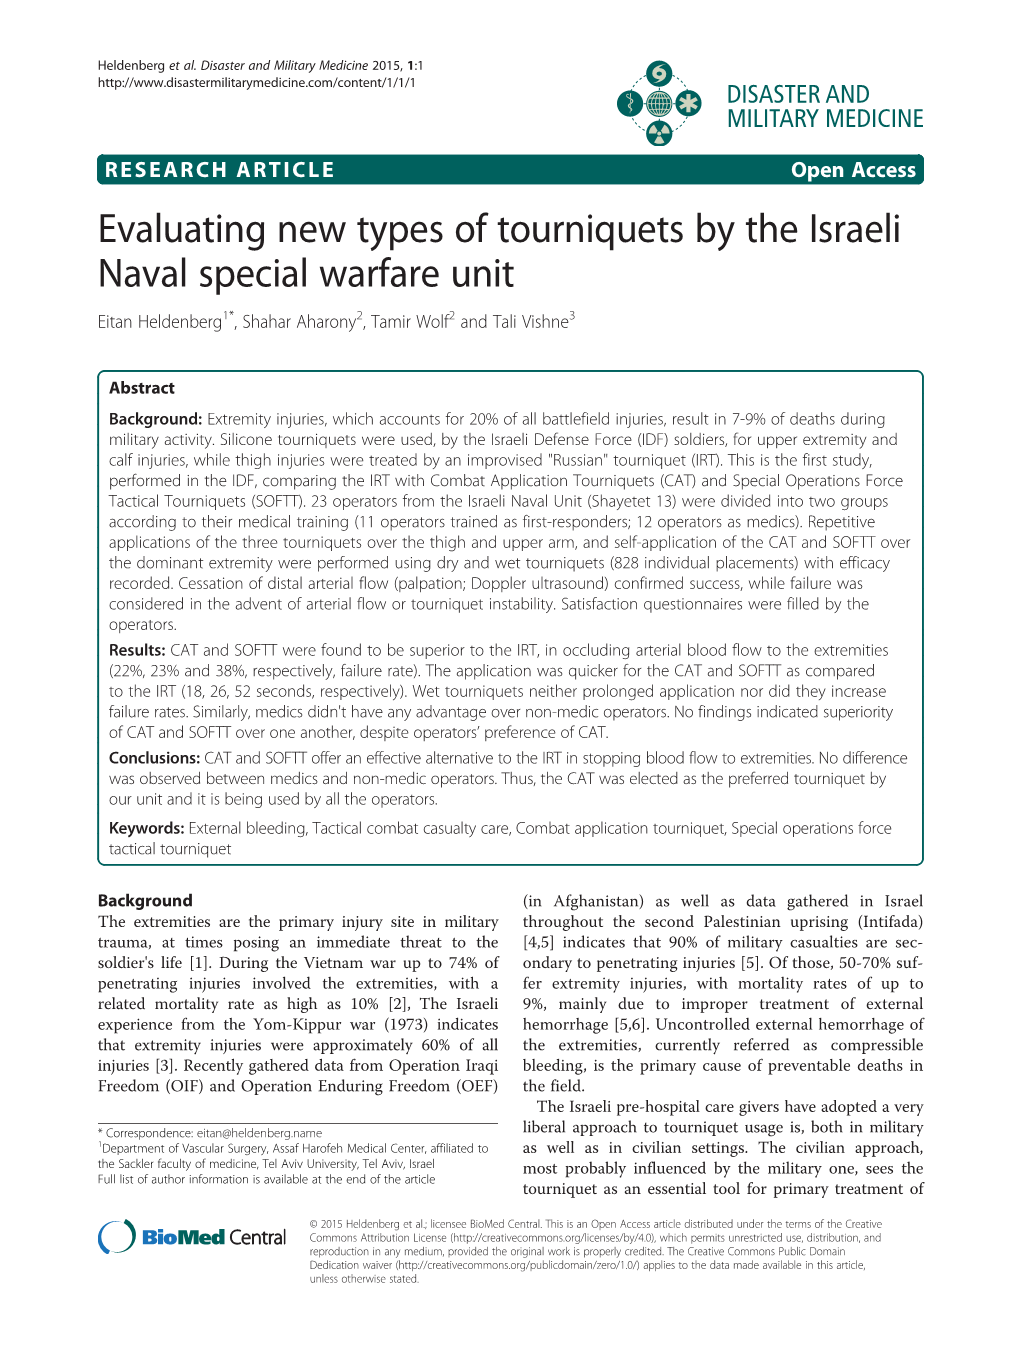 Evaluating New Types of Tourniquets by the Israeli Naval Special Warfare Unit Eitan Heldenberg1*, Shahar Aharony2, Tamir Wolf2 and Tali Vishne3